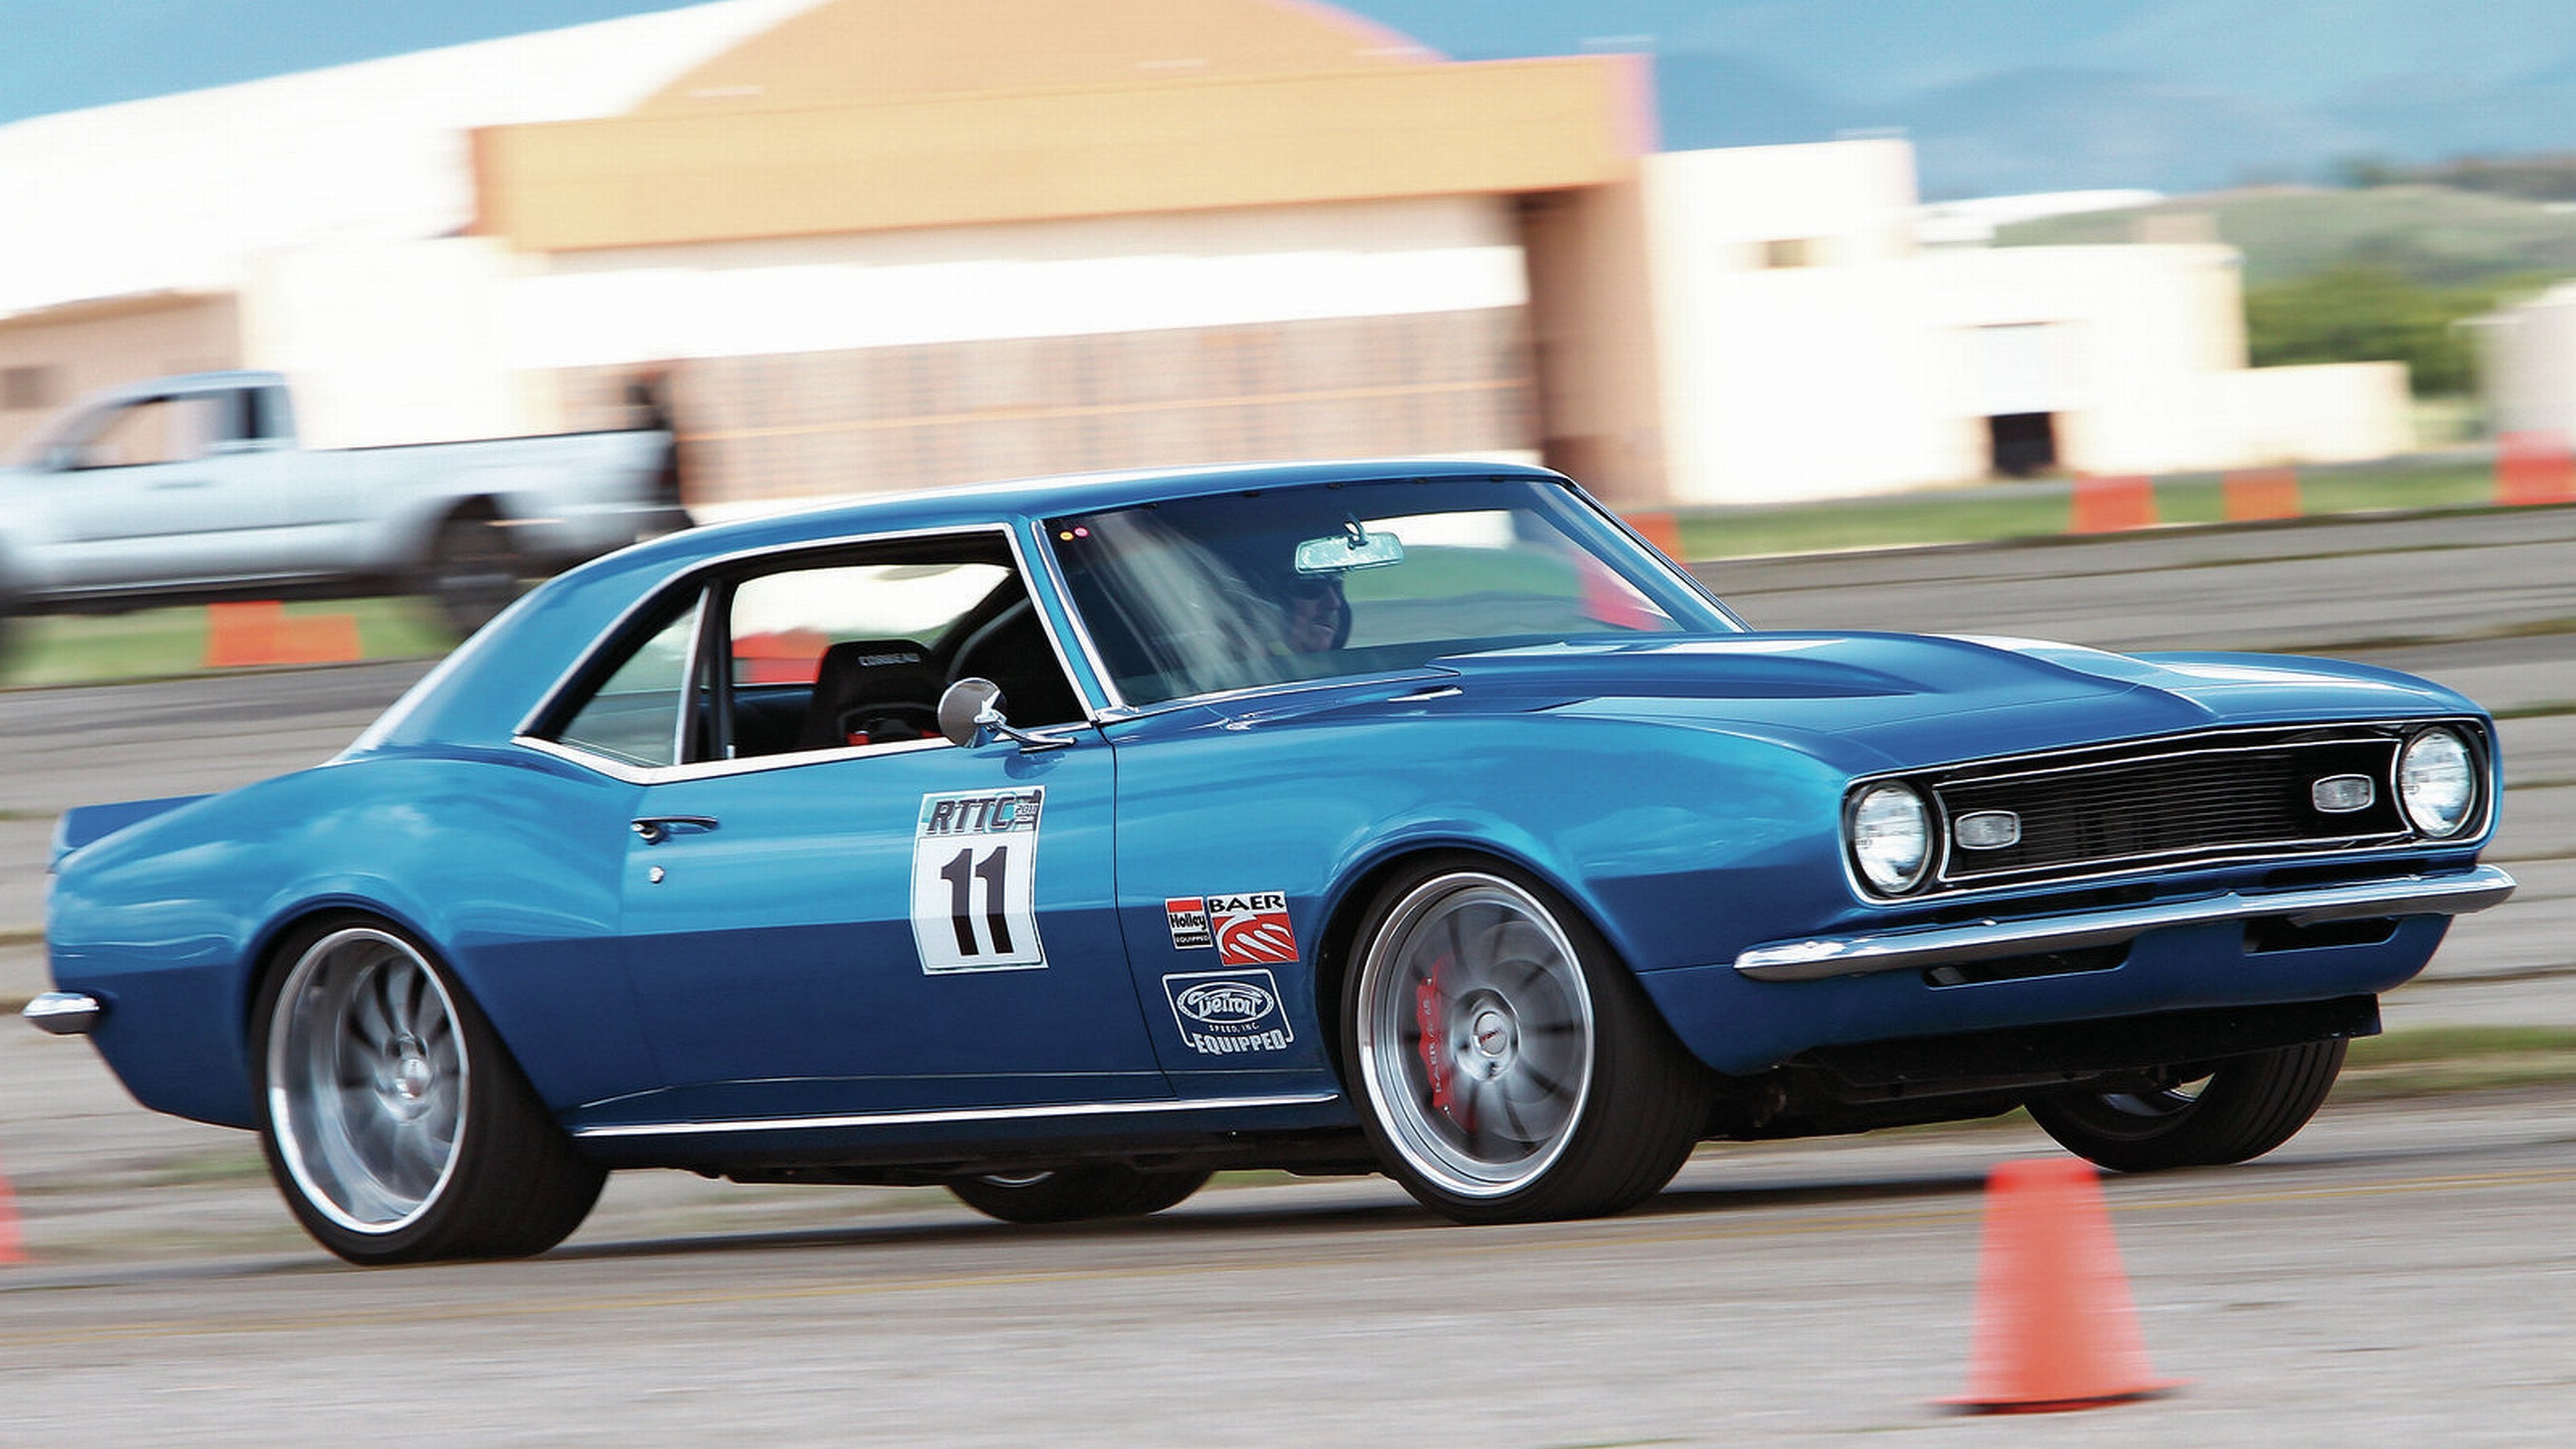 Autocross: The first-generation 1968 Chevrolet Camaro Z28, A classic American muscle car. 3840x2160 4K Wallpaper.